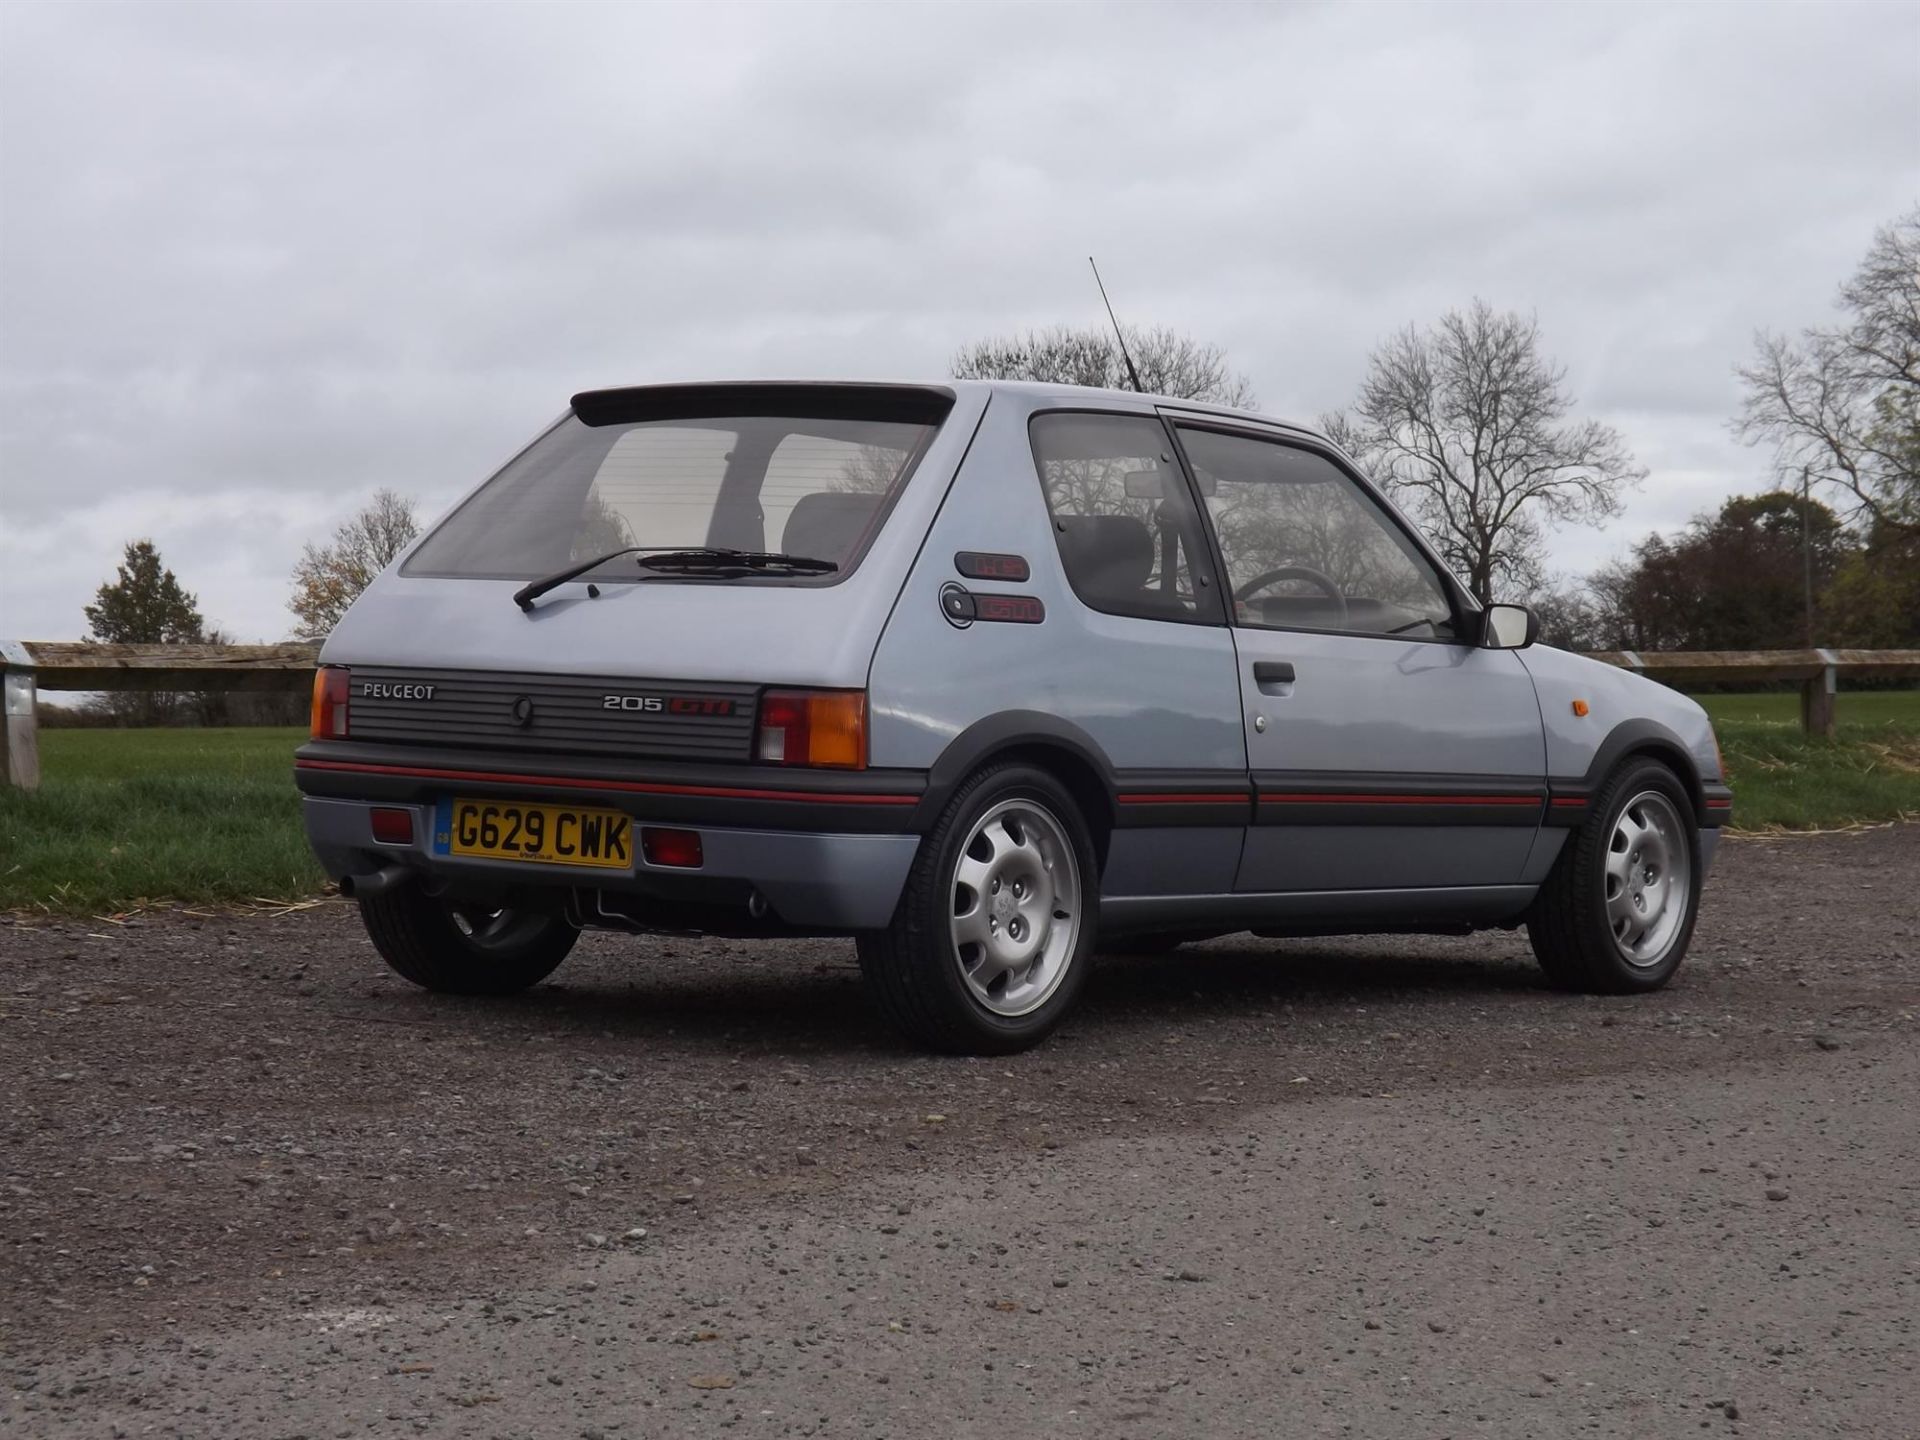 1990 Peugeot 205 GTi 1.6 (Phase 2) - Image 8 of 10